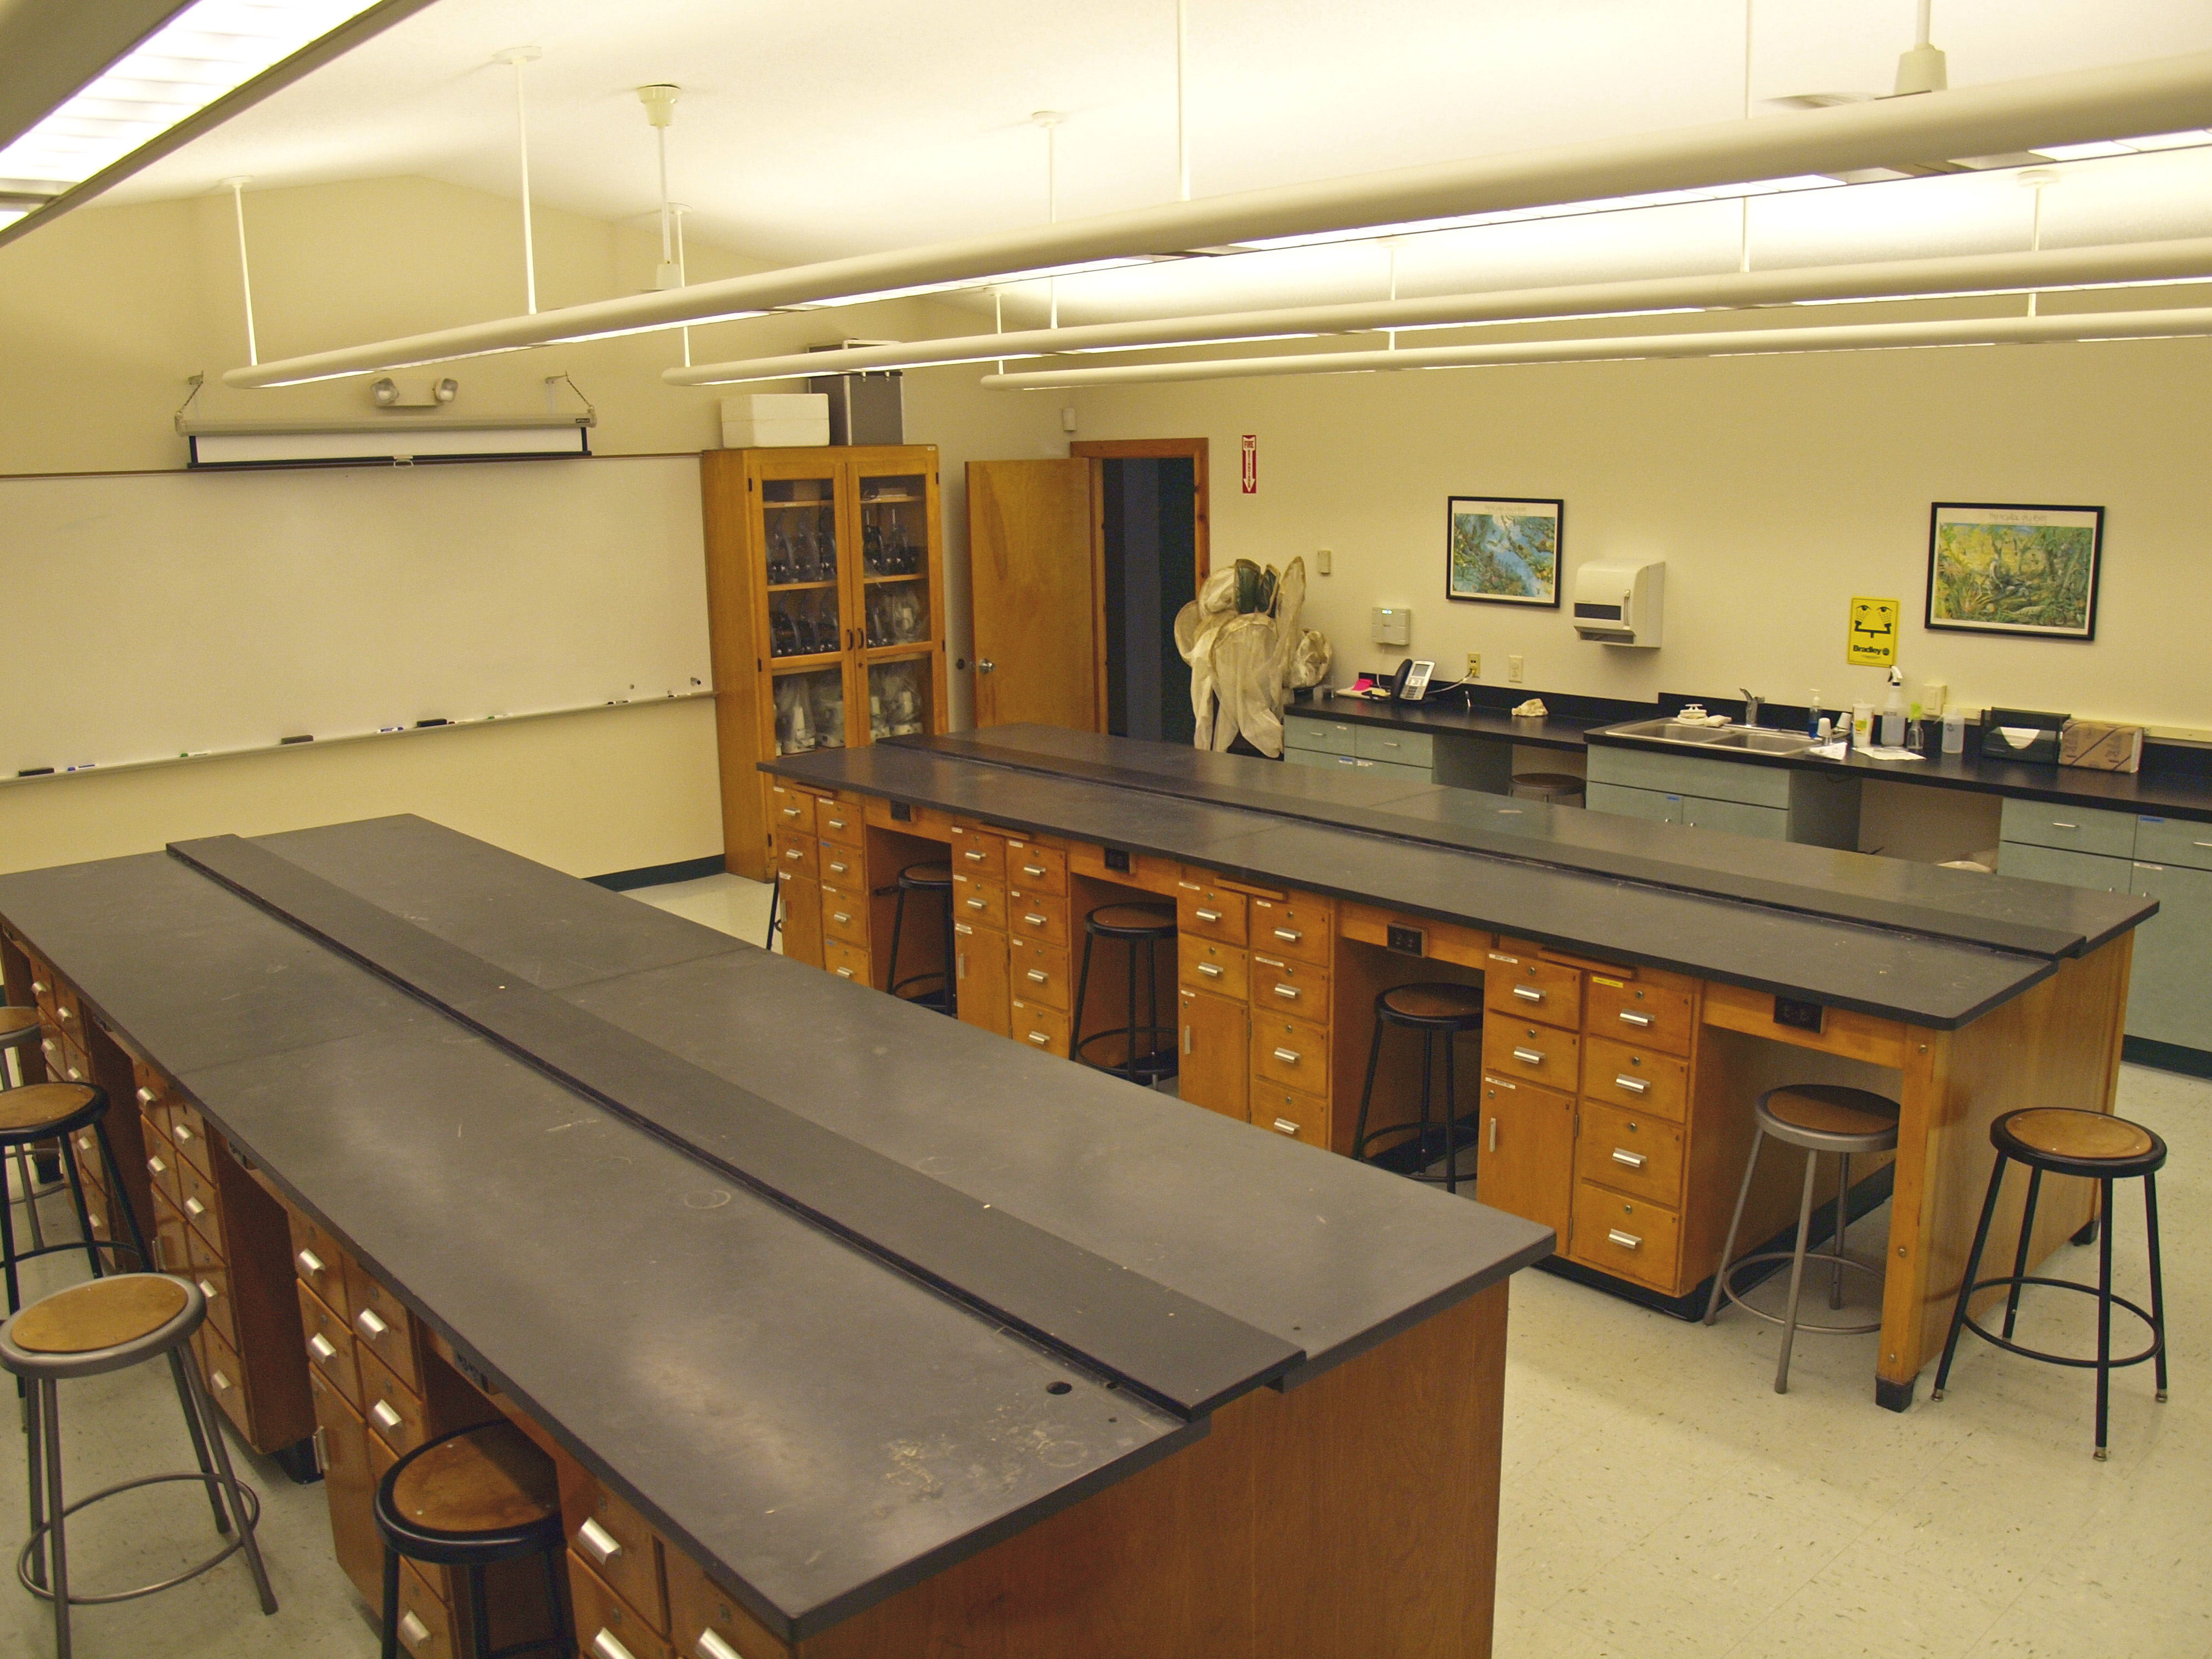 An empty classroom/lab at the Nature Center